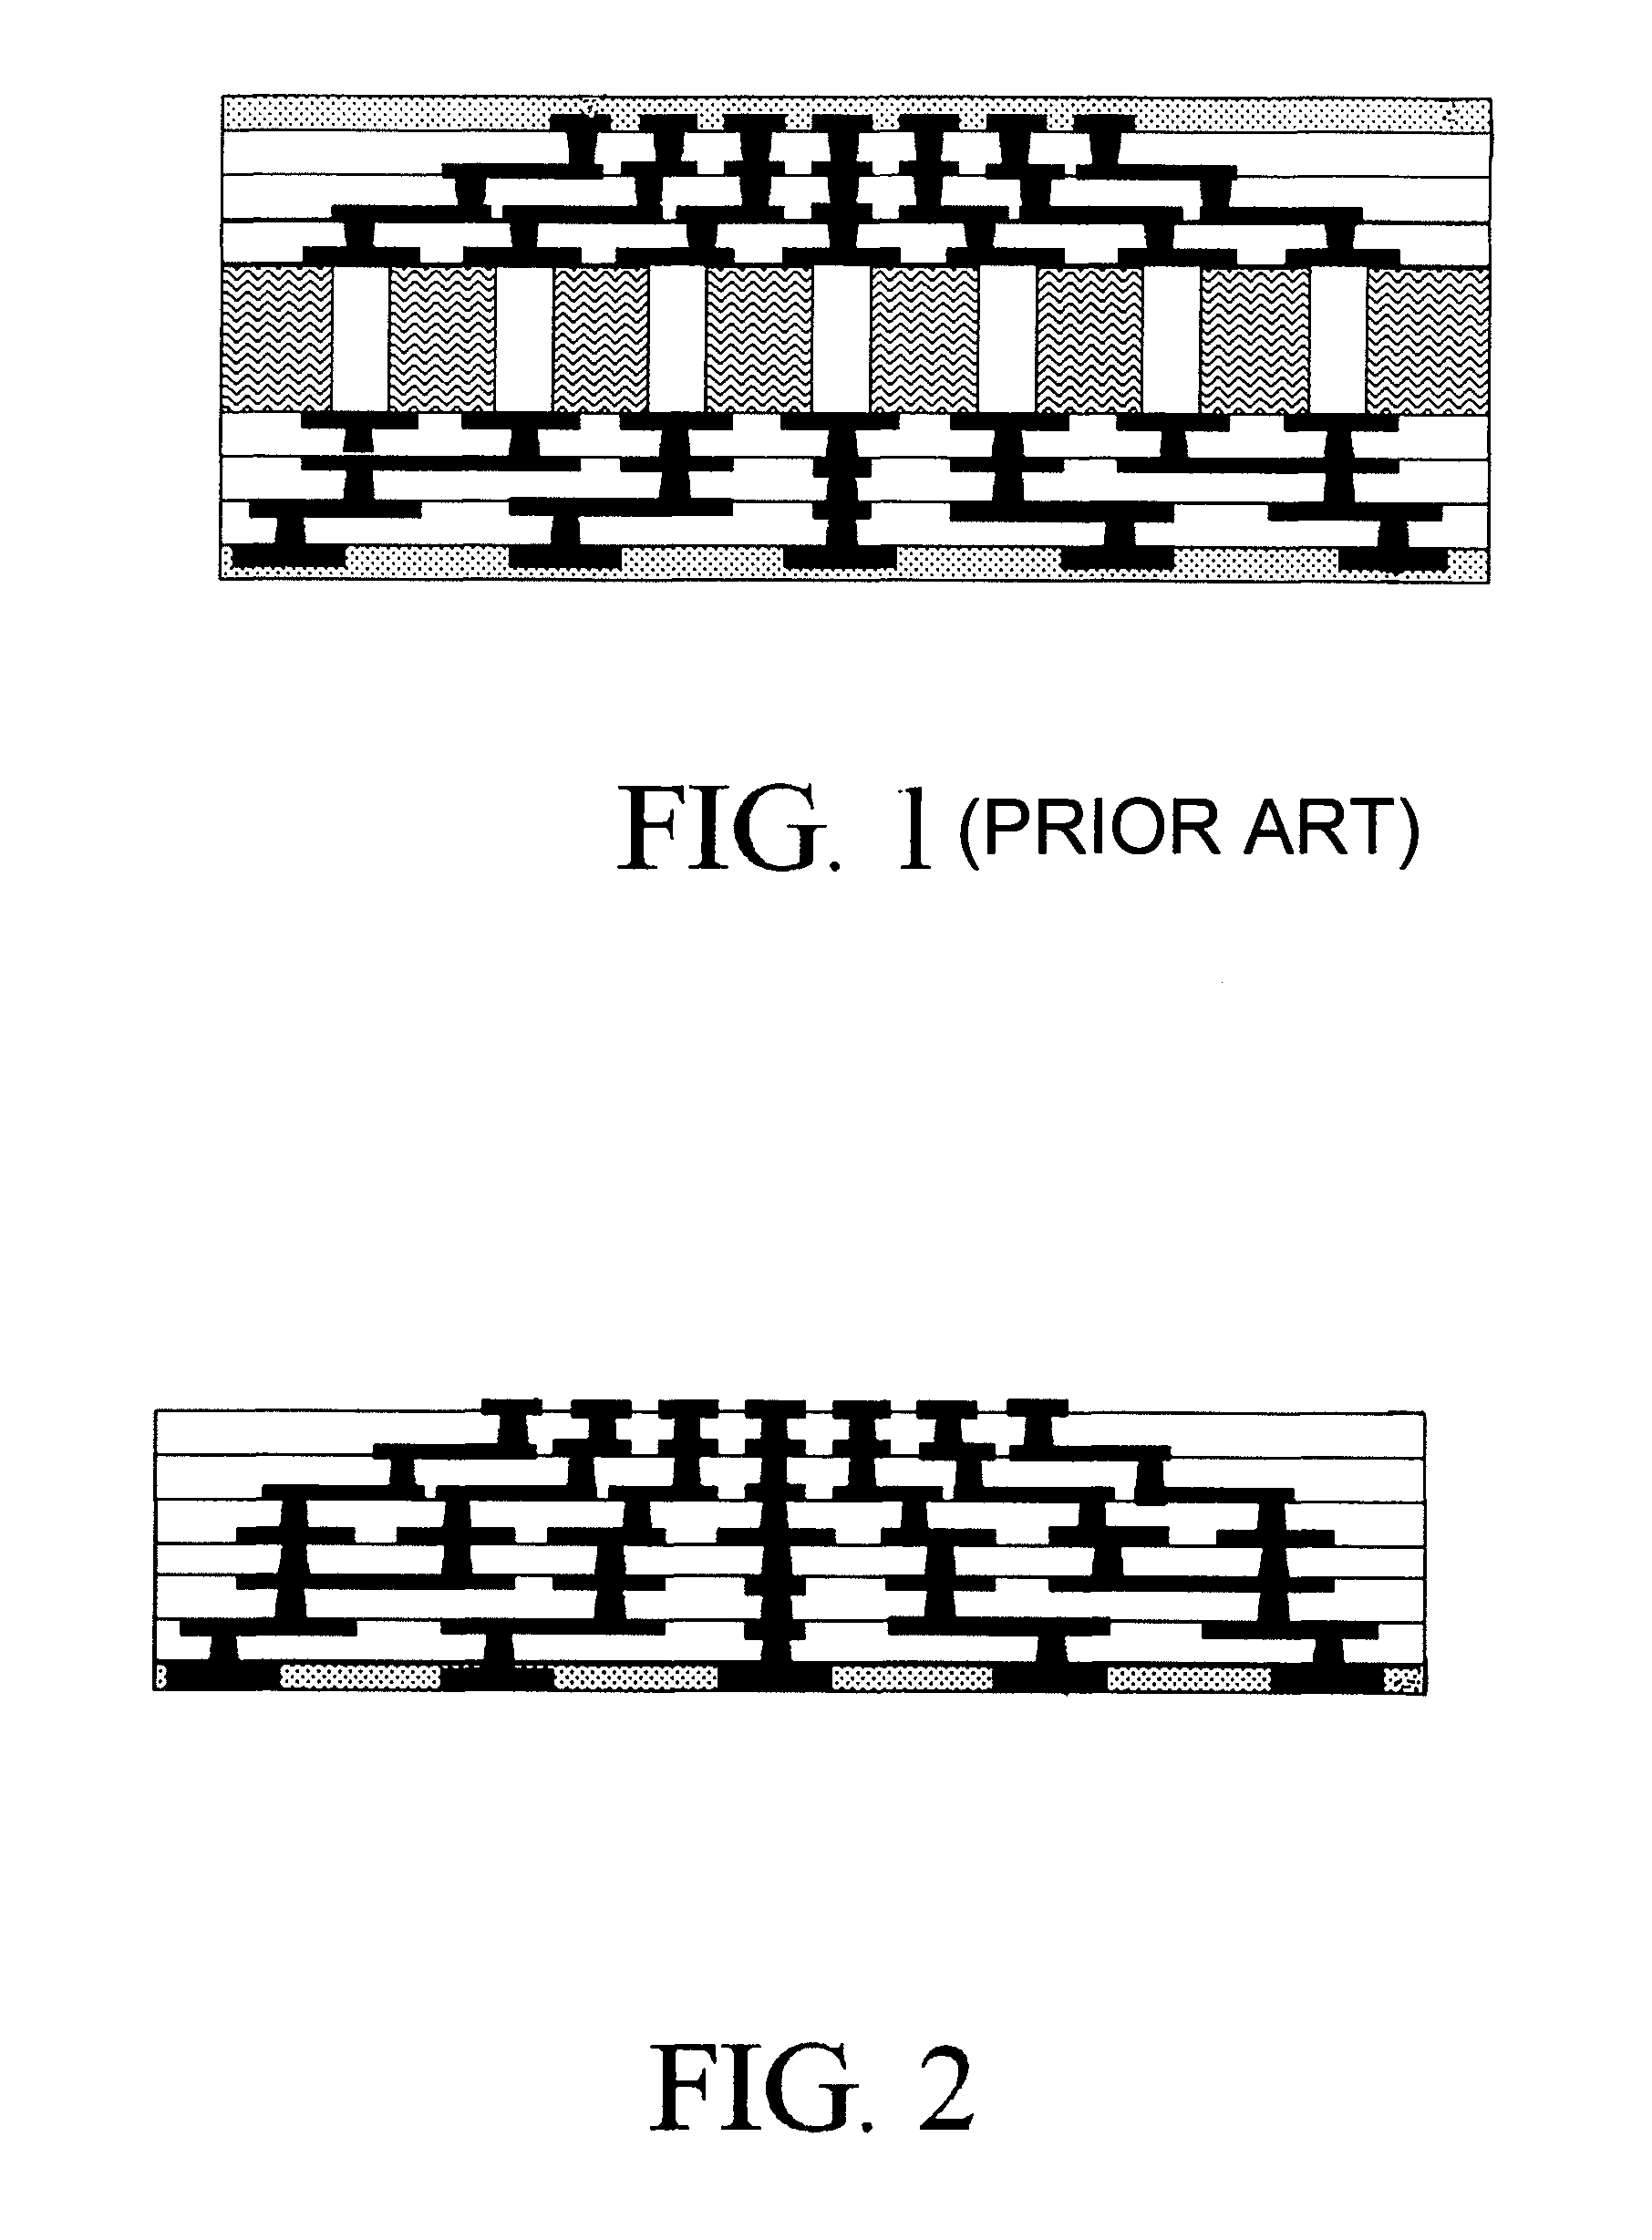 Multilayered circuit board and semiconductor device